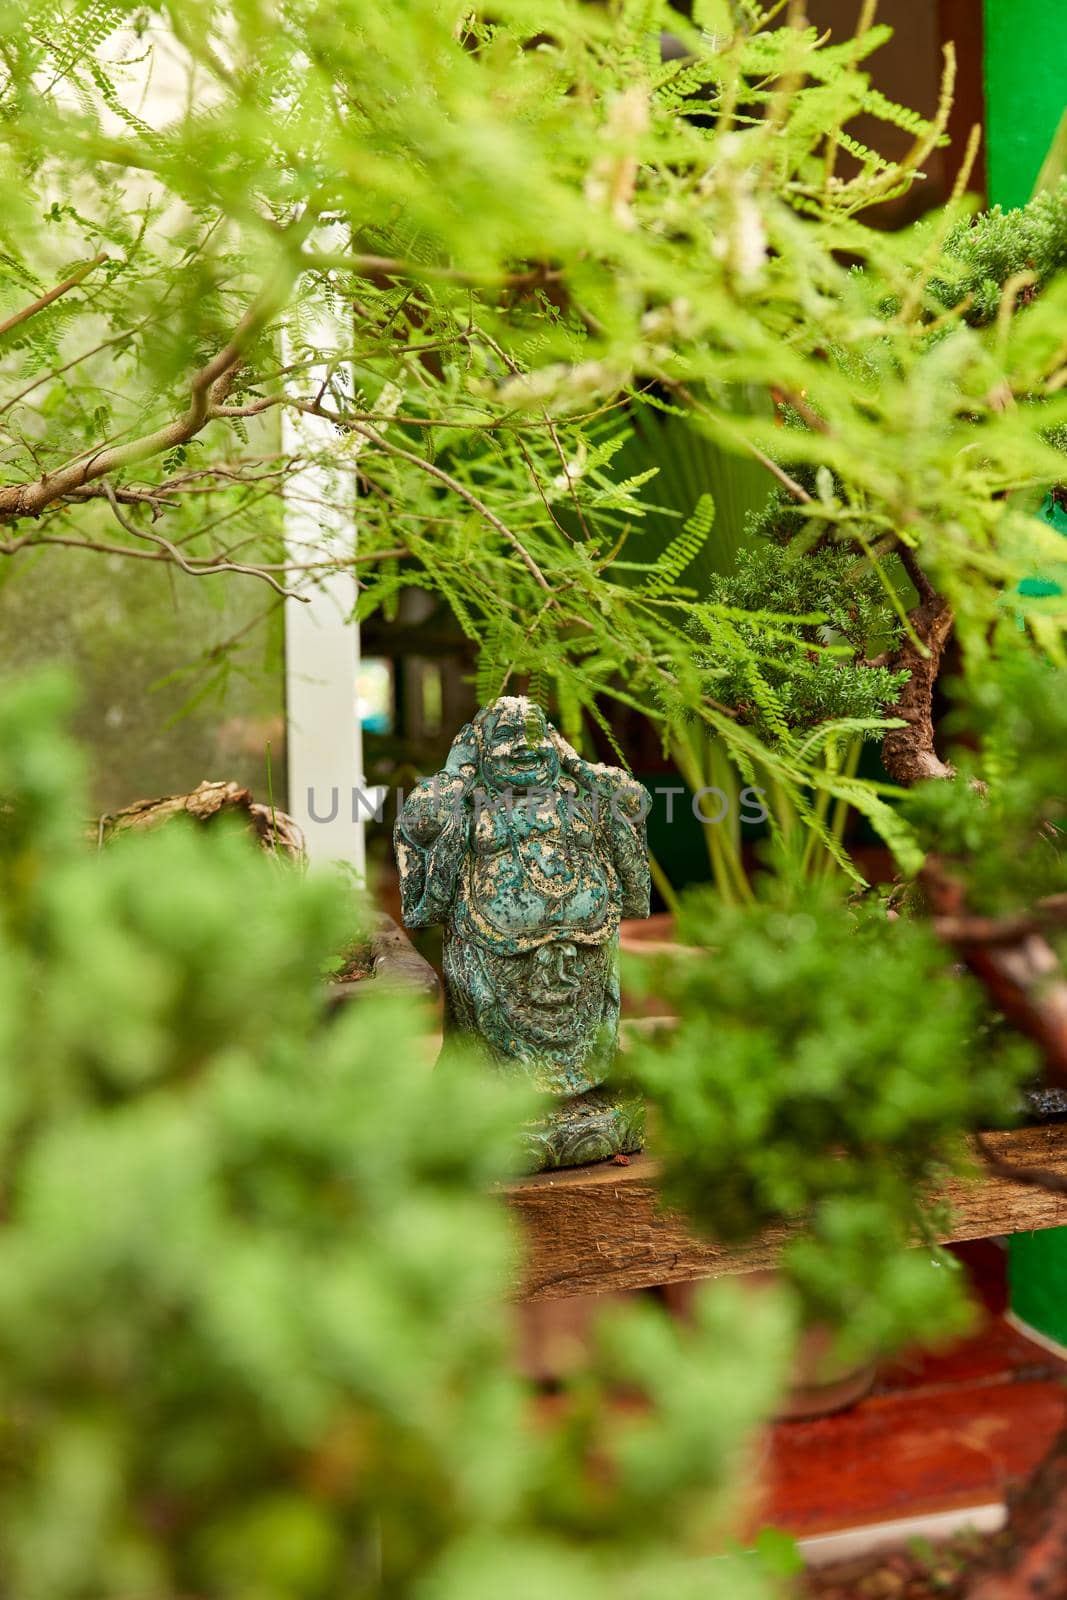 bonsai nursery with variety of species. bonsais, plants and trees.